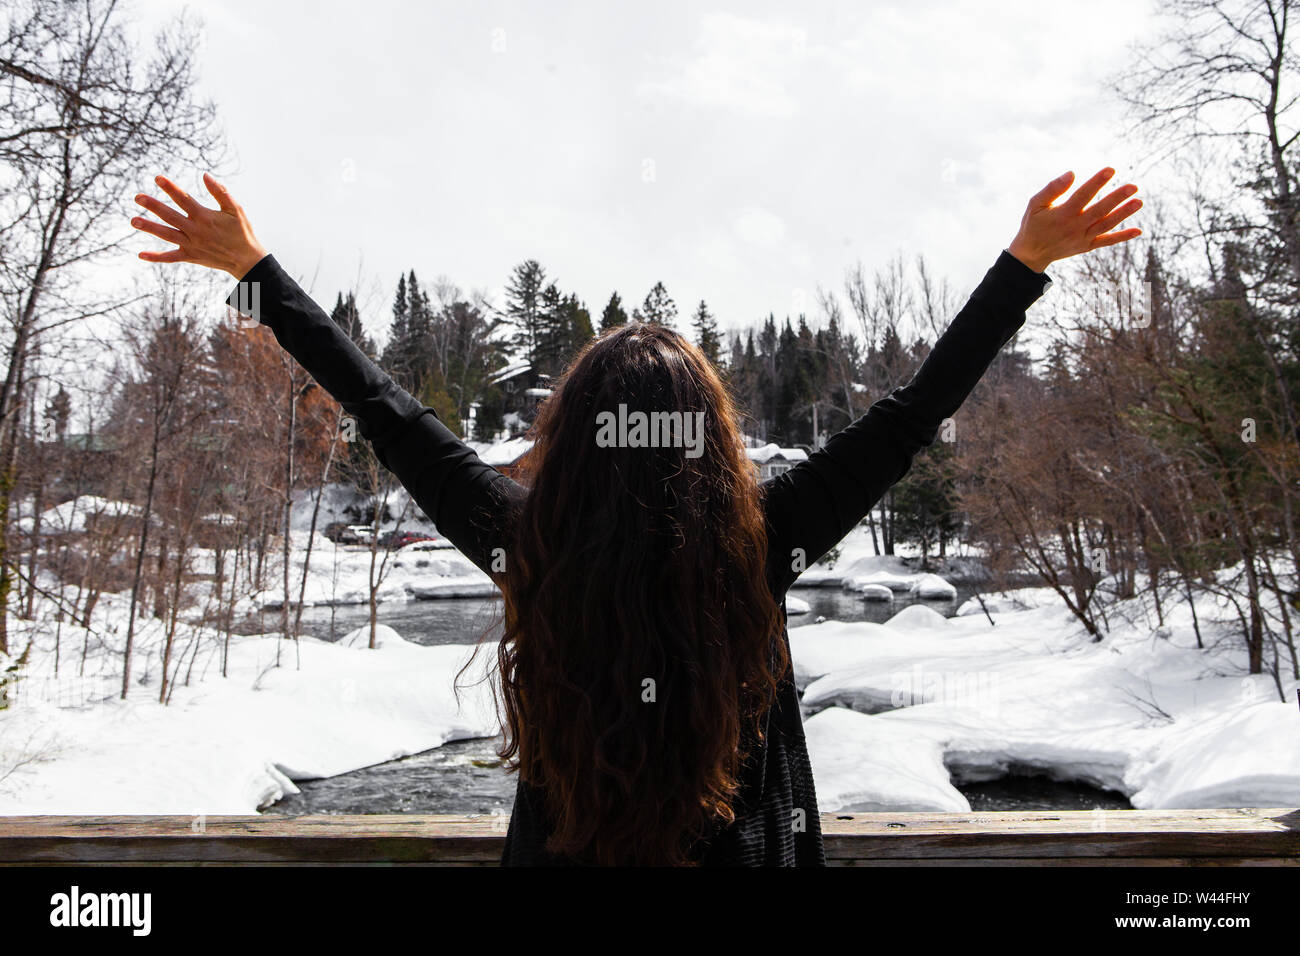 A young female is viewed from the back, gives an excited expression at the beautiful snowy landscape in the background, enjoys winter surroundings Stock Photo